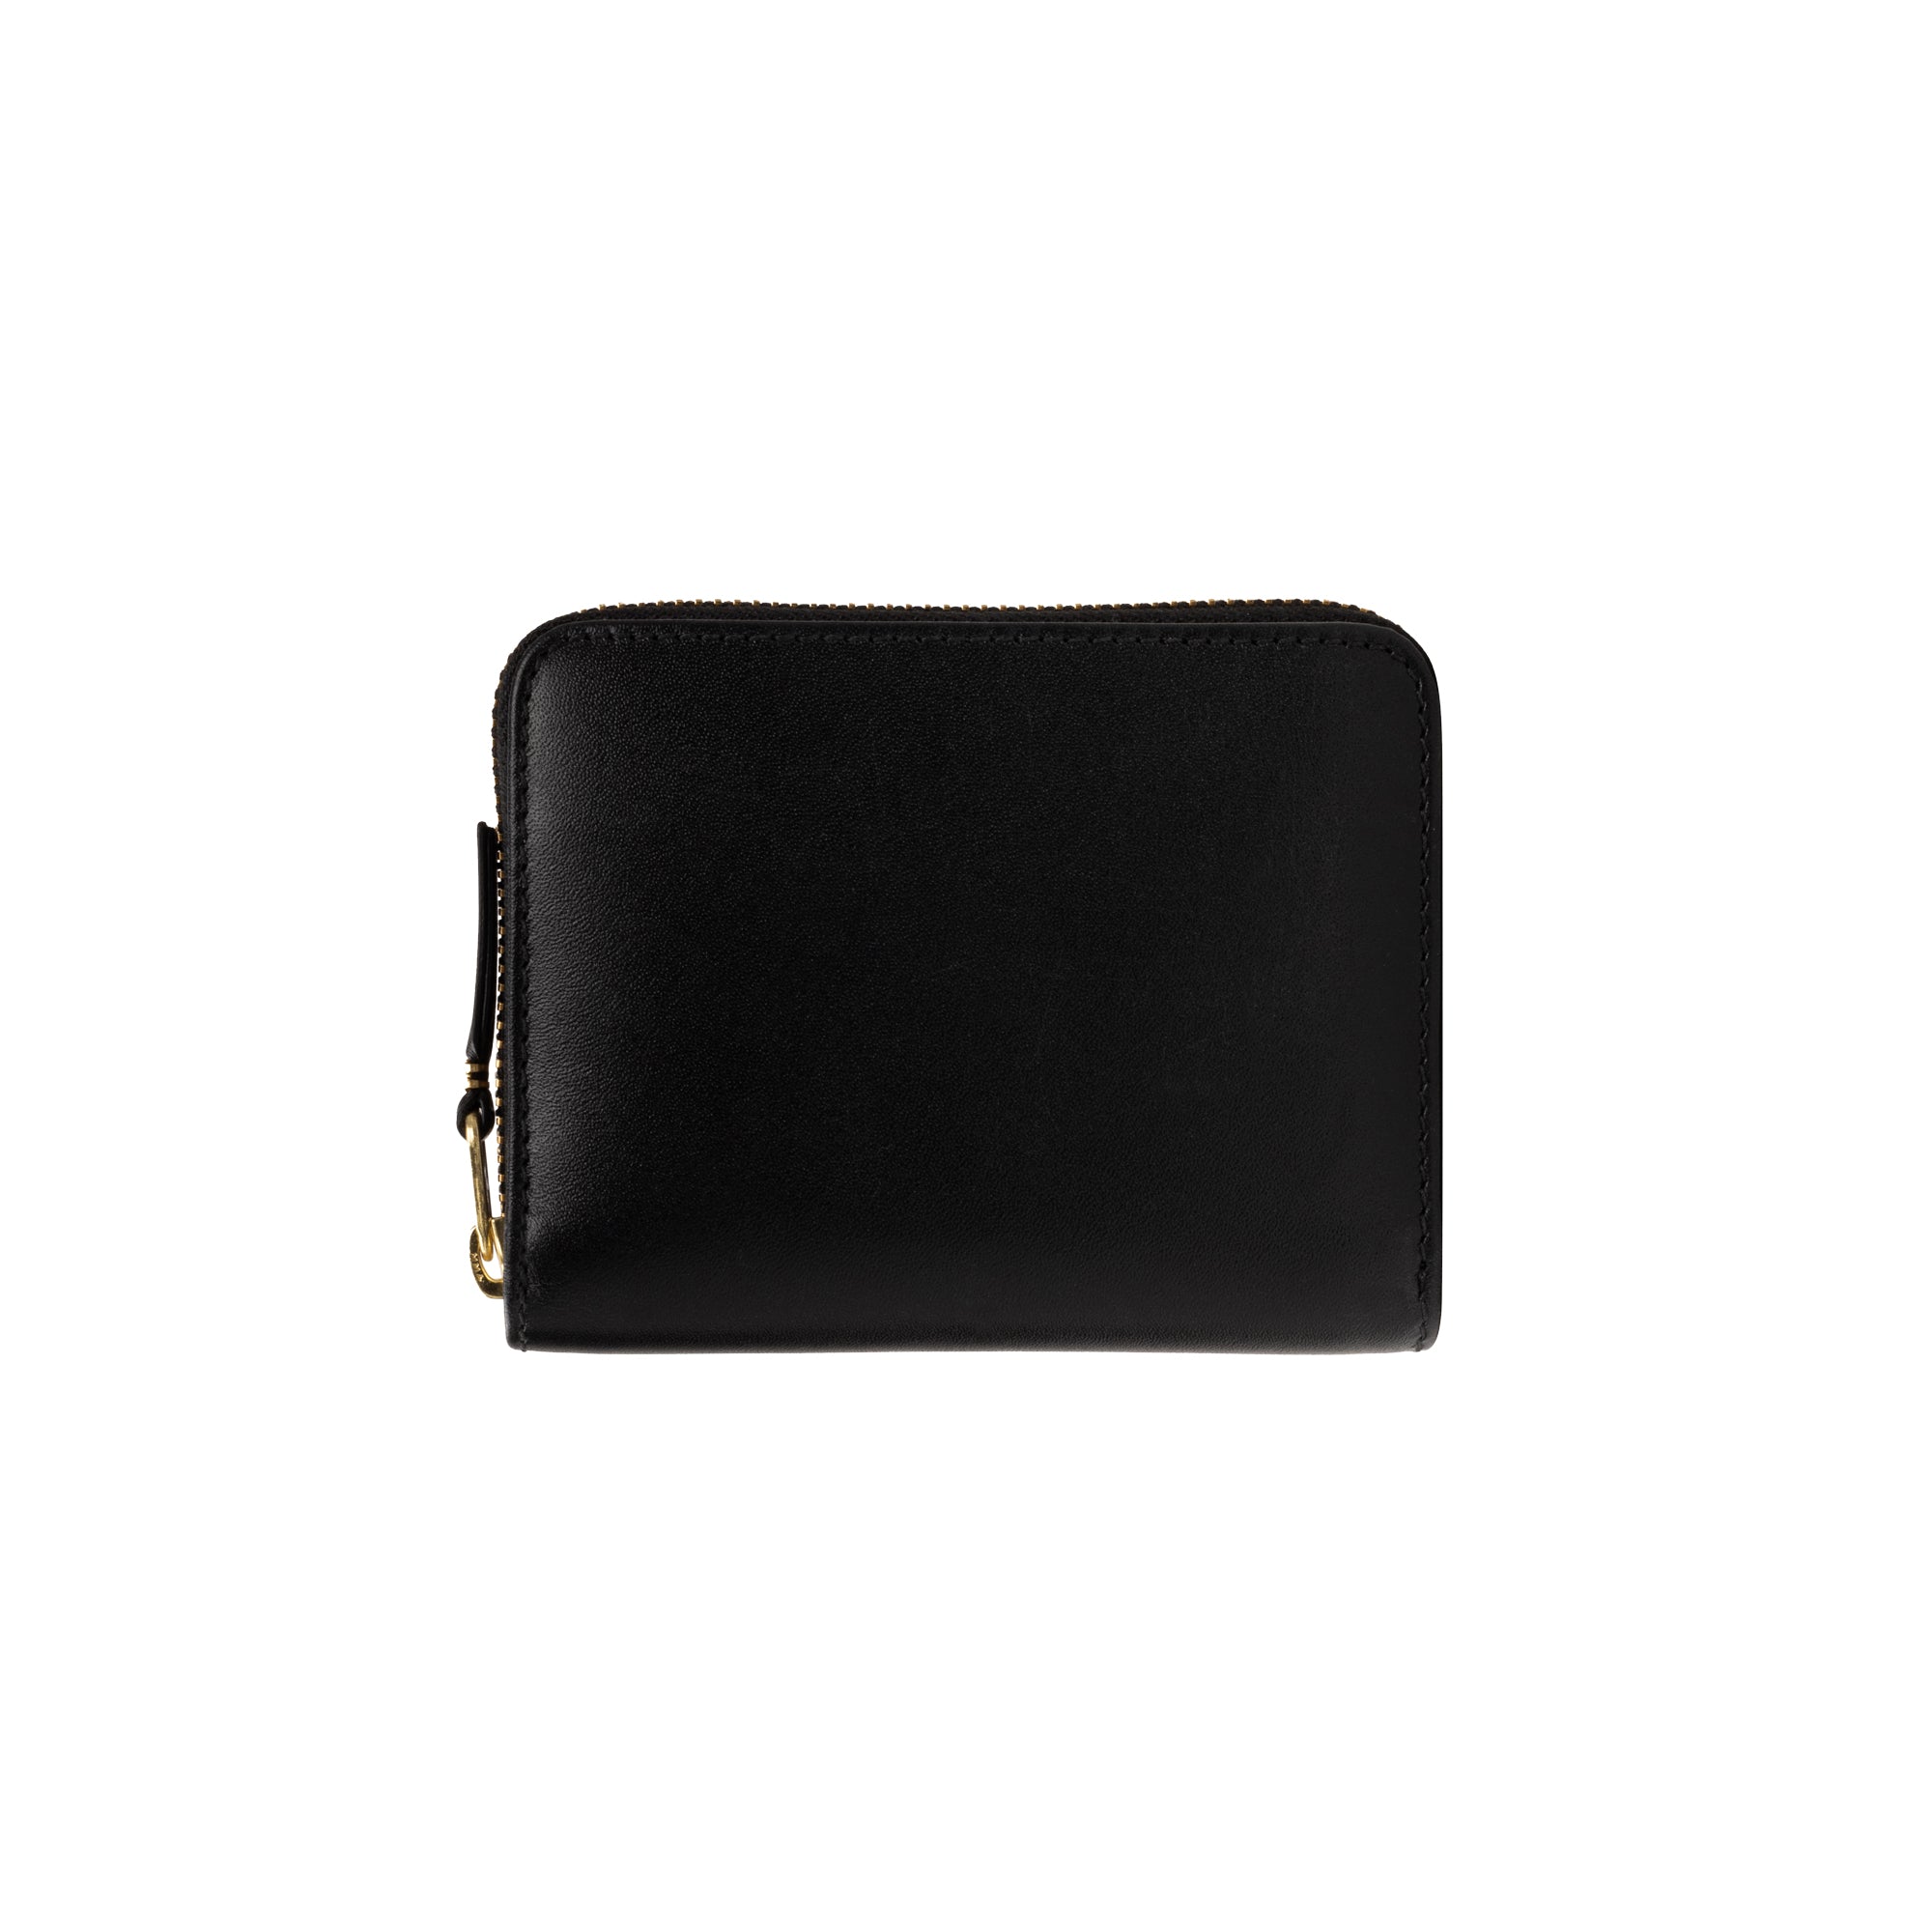 CDG WALLET - Classic Leather Wallet - (SA2110 Black) view 1